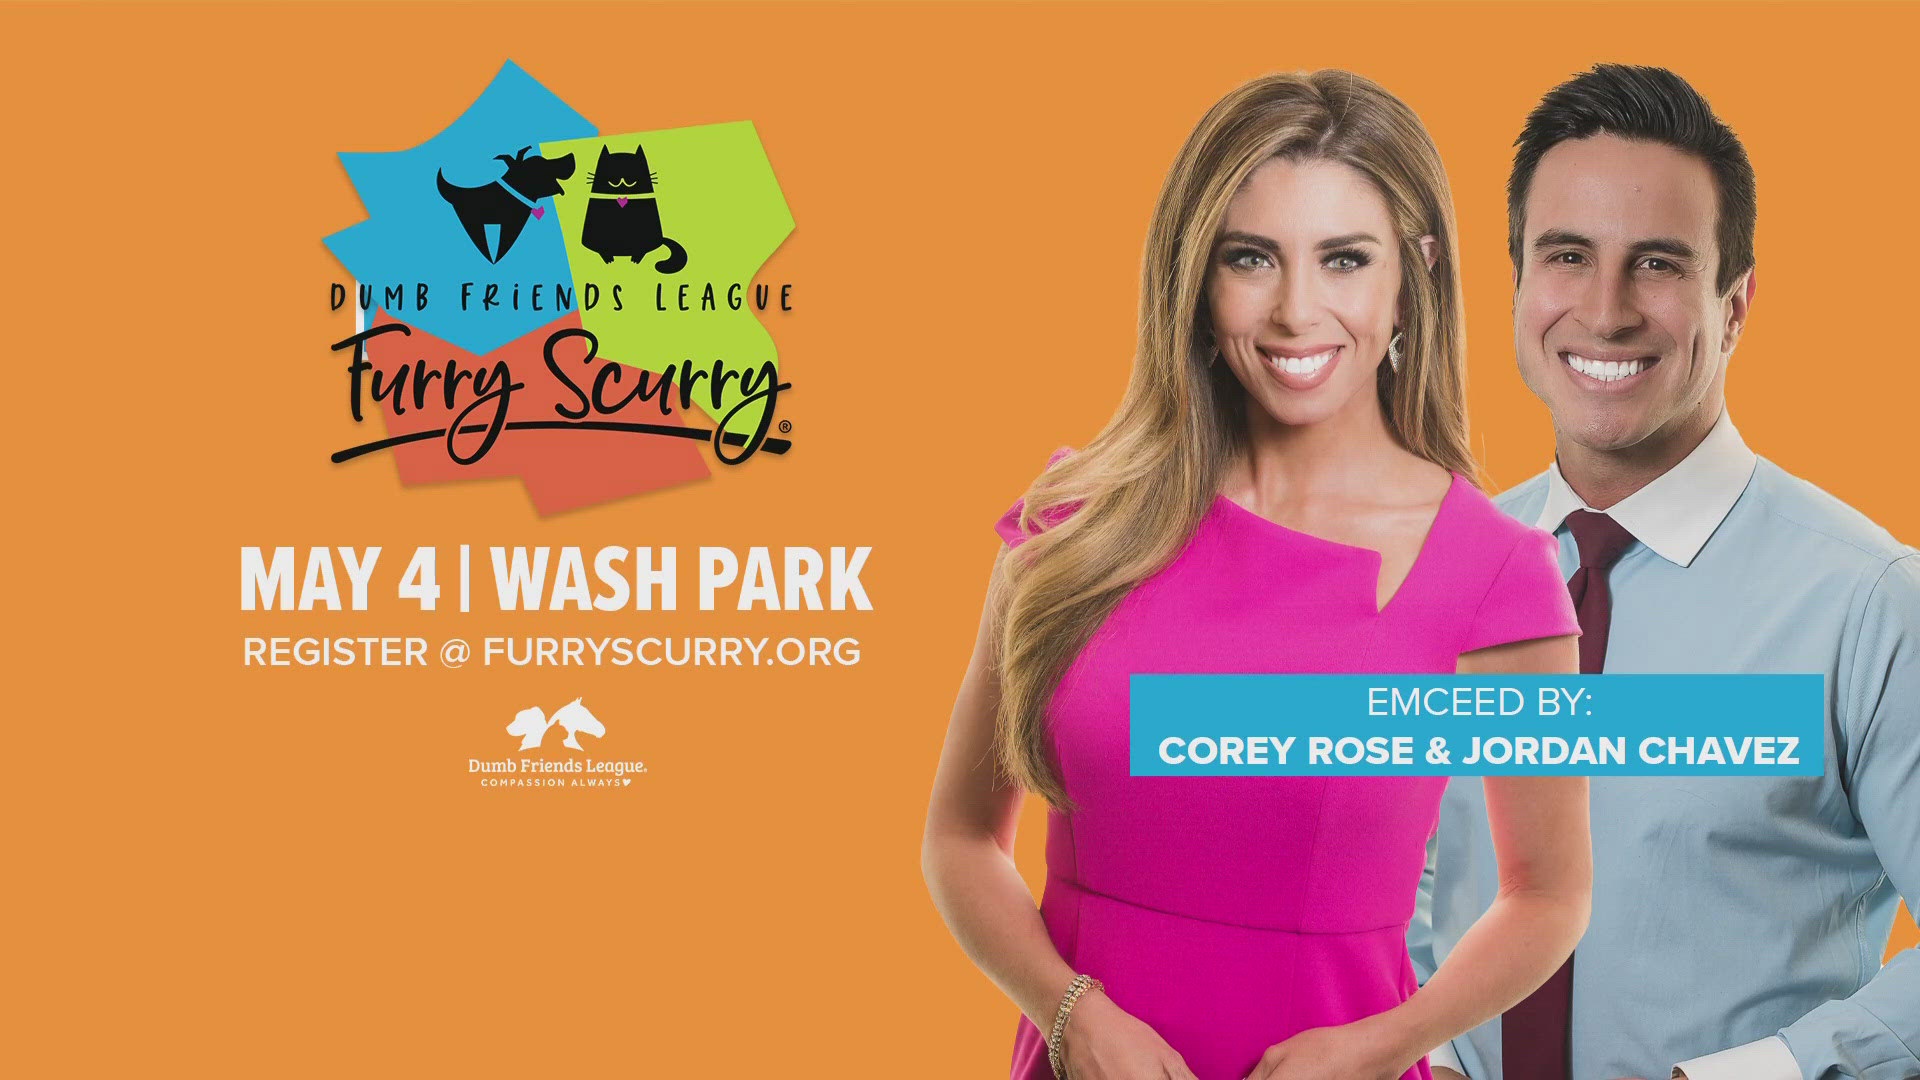 The Furry Scurry is a two-mile dog walk at Denver's Washington Park to benefit the animals at the Dumb Friends League.